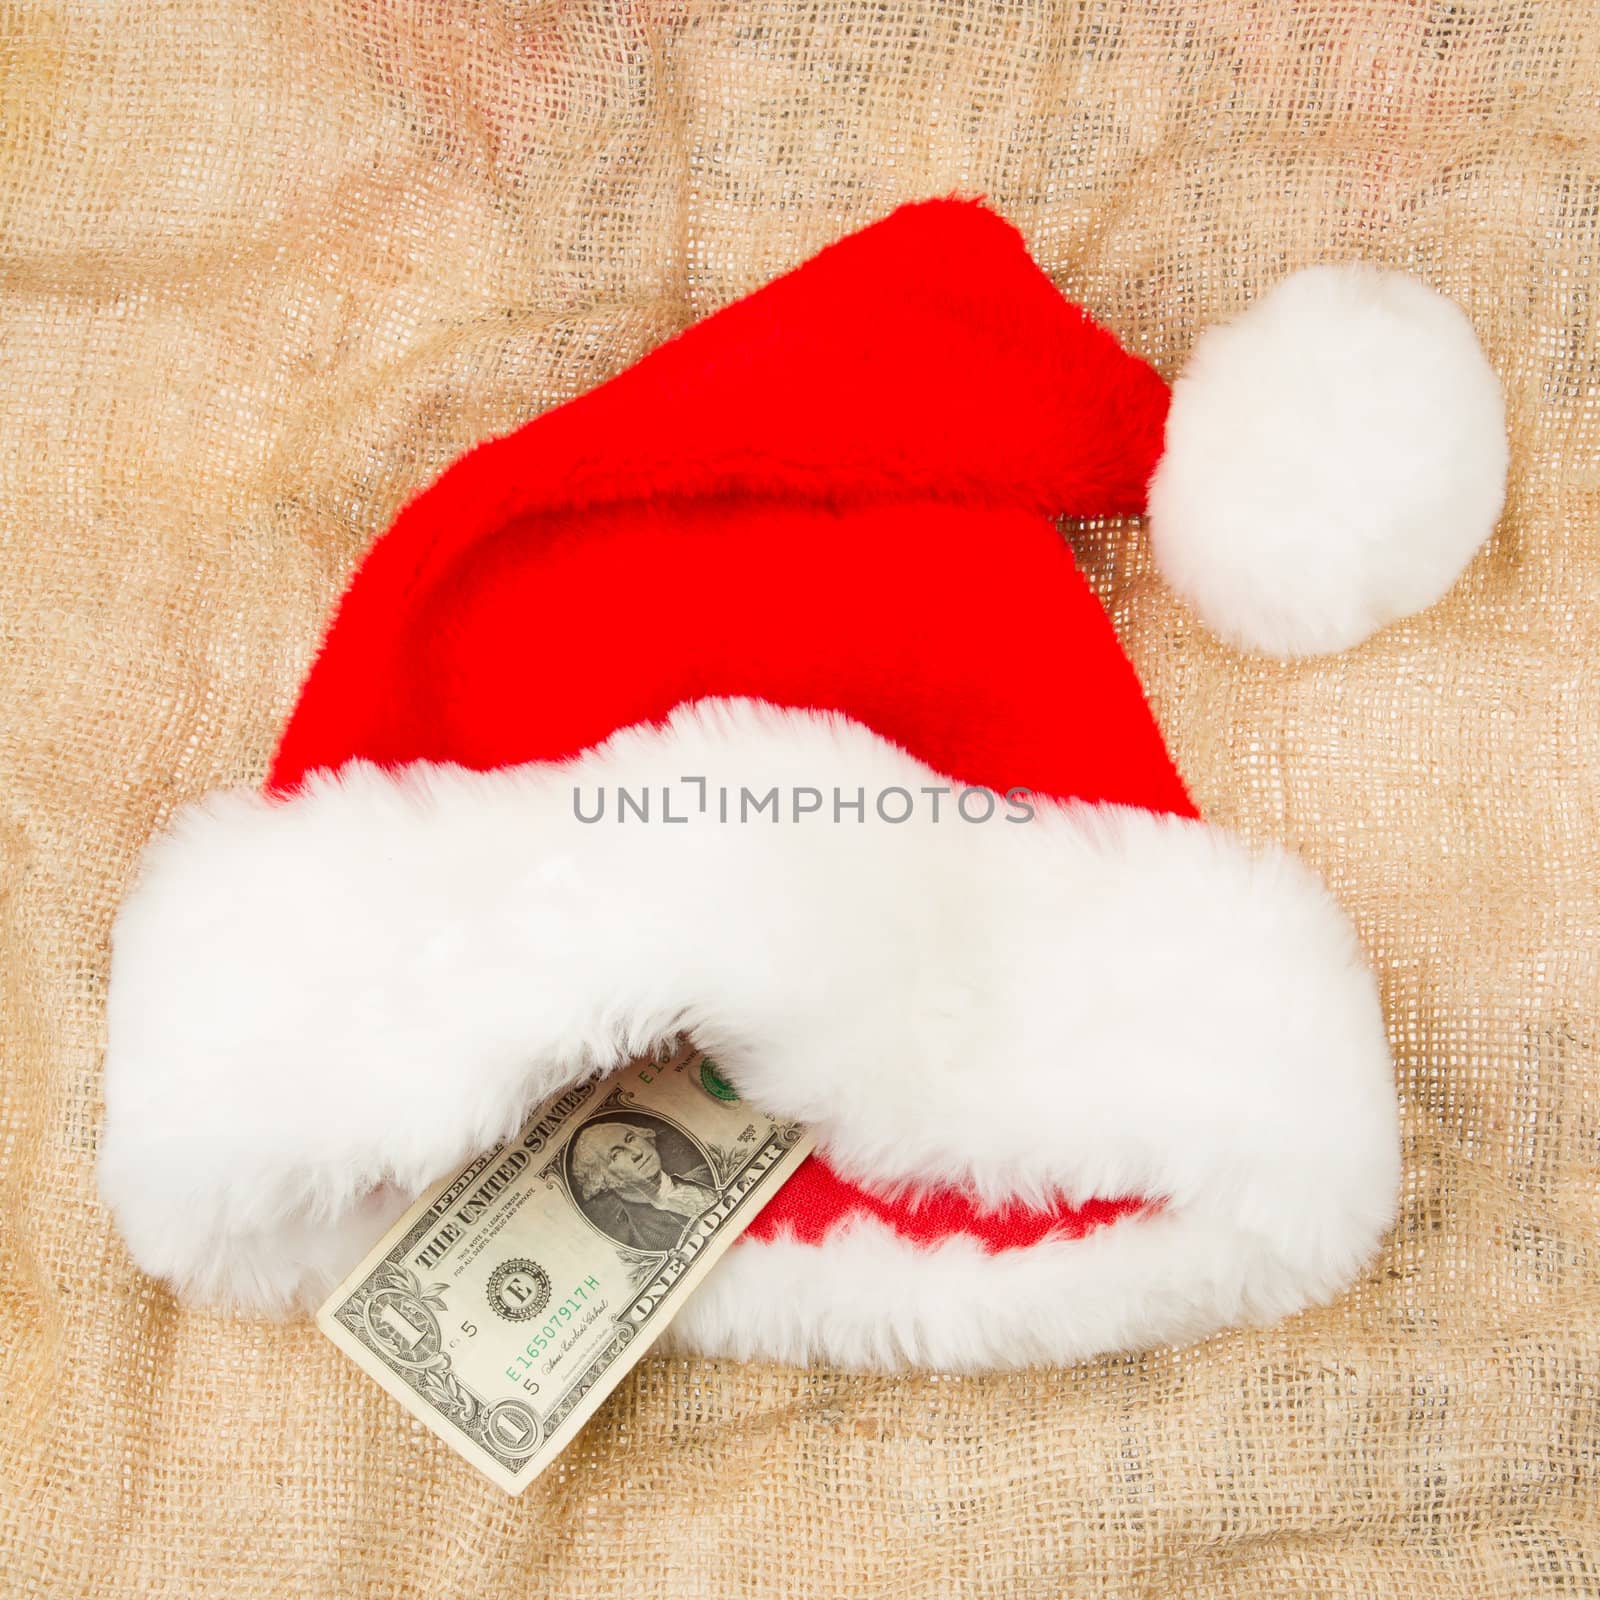 Santa's crisis budget, one dollar in his hat